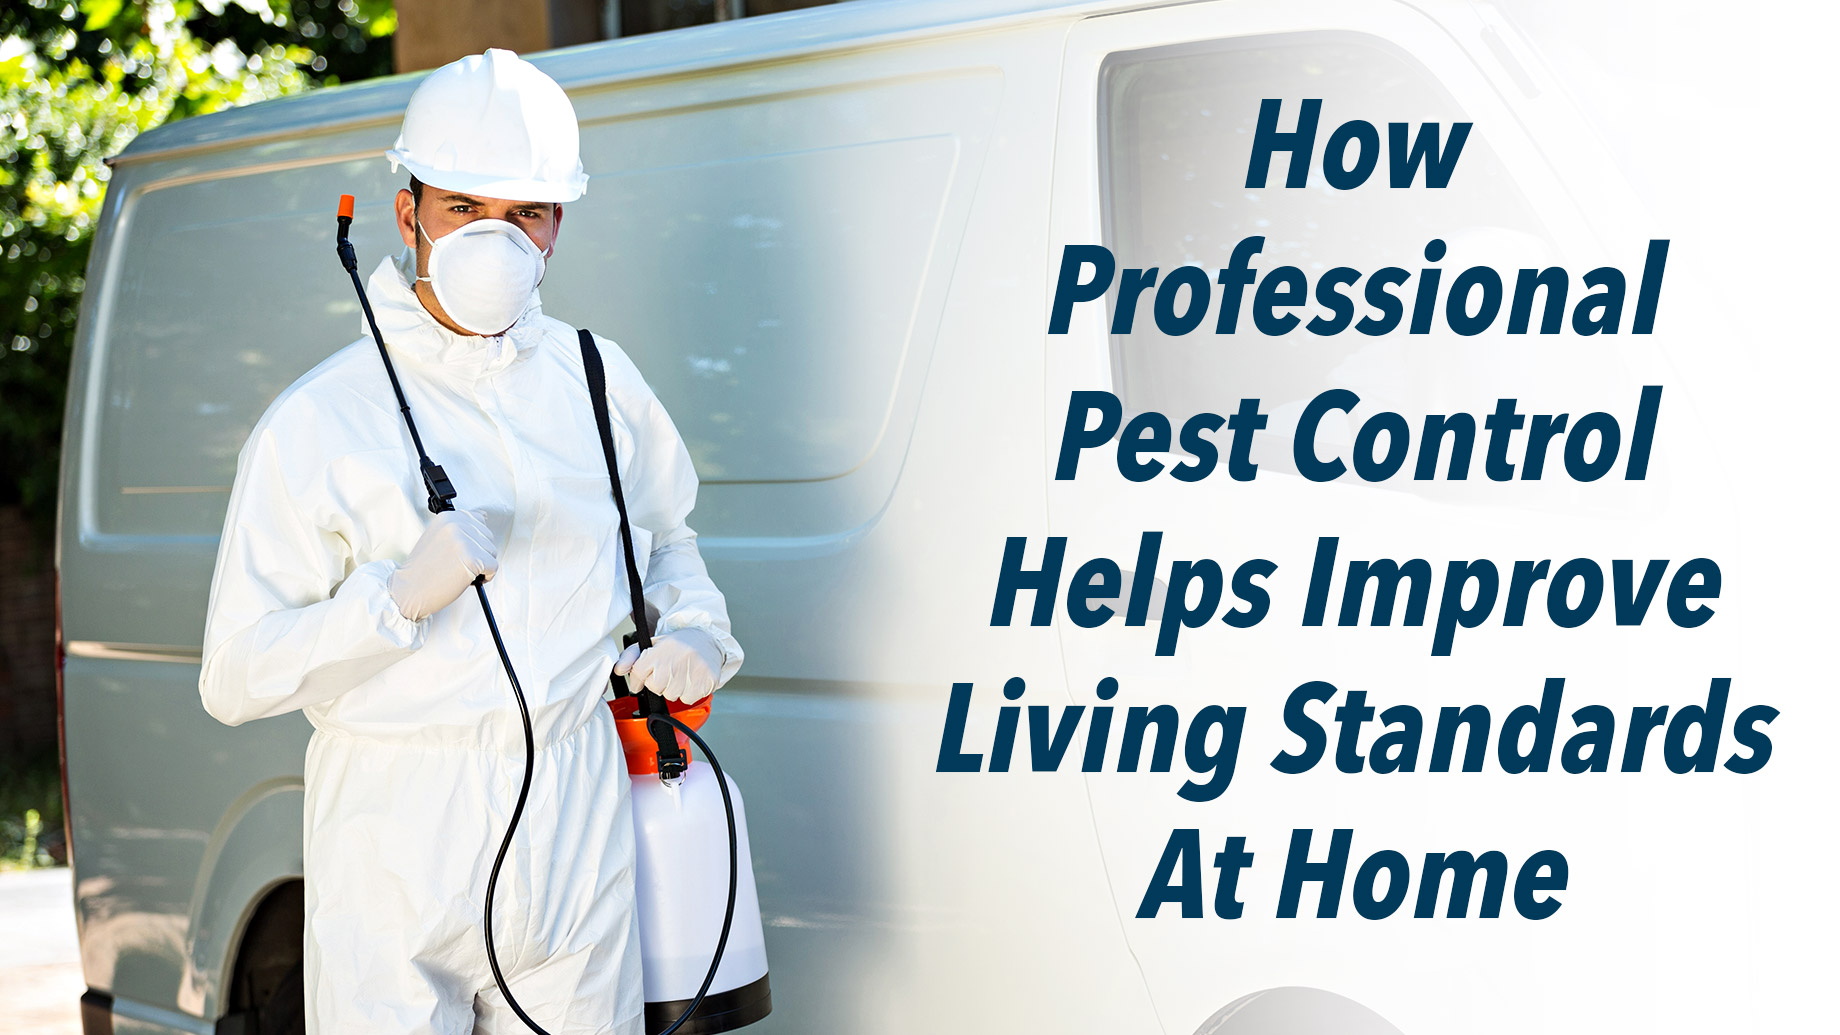 How Professional Pest Control Helps Improve Living Standards At Home – The Pinnacle List